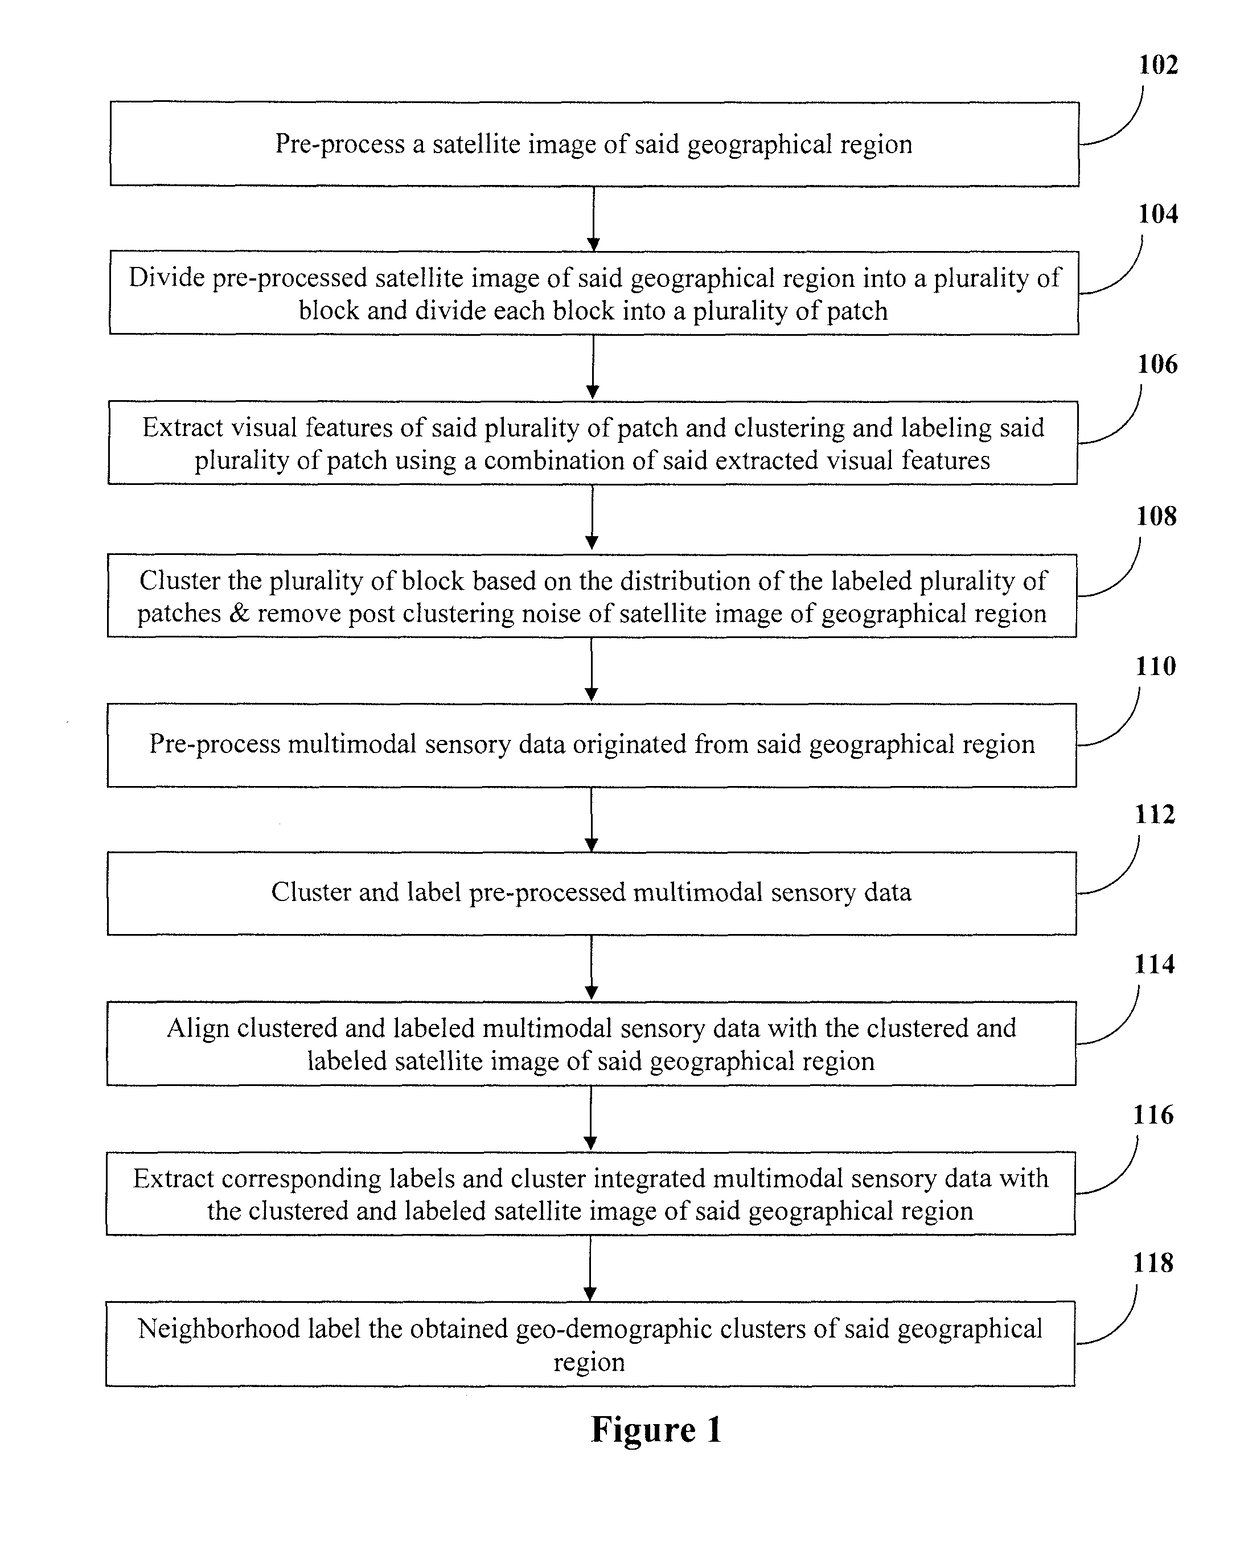 Method and system for geo-demographic classification of a geographical region